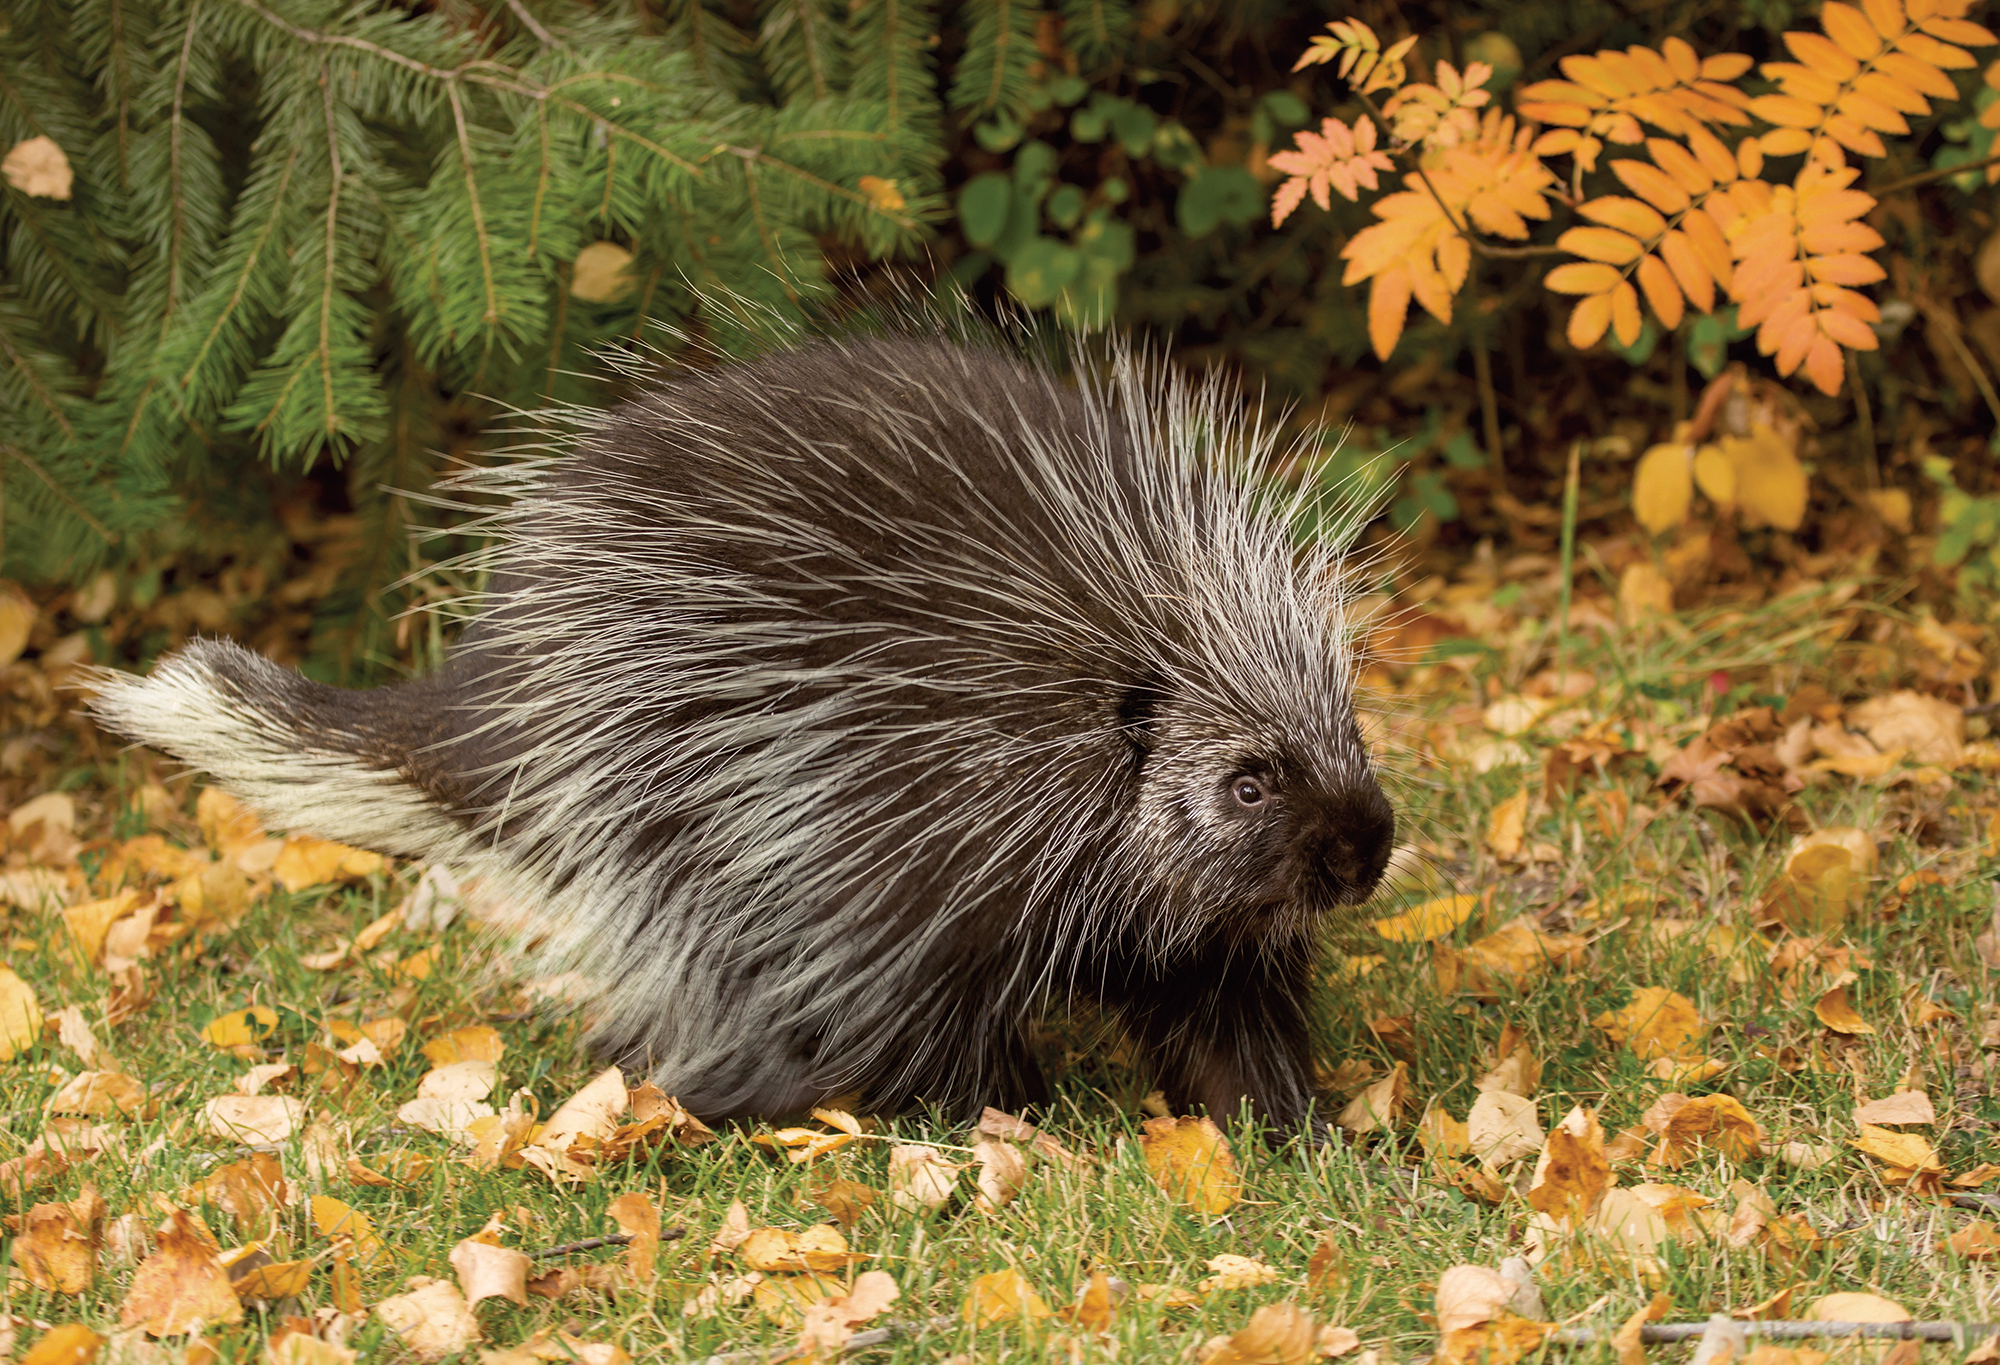 A black porcupine with white quills.